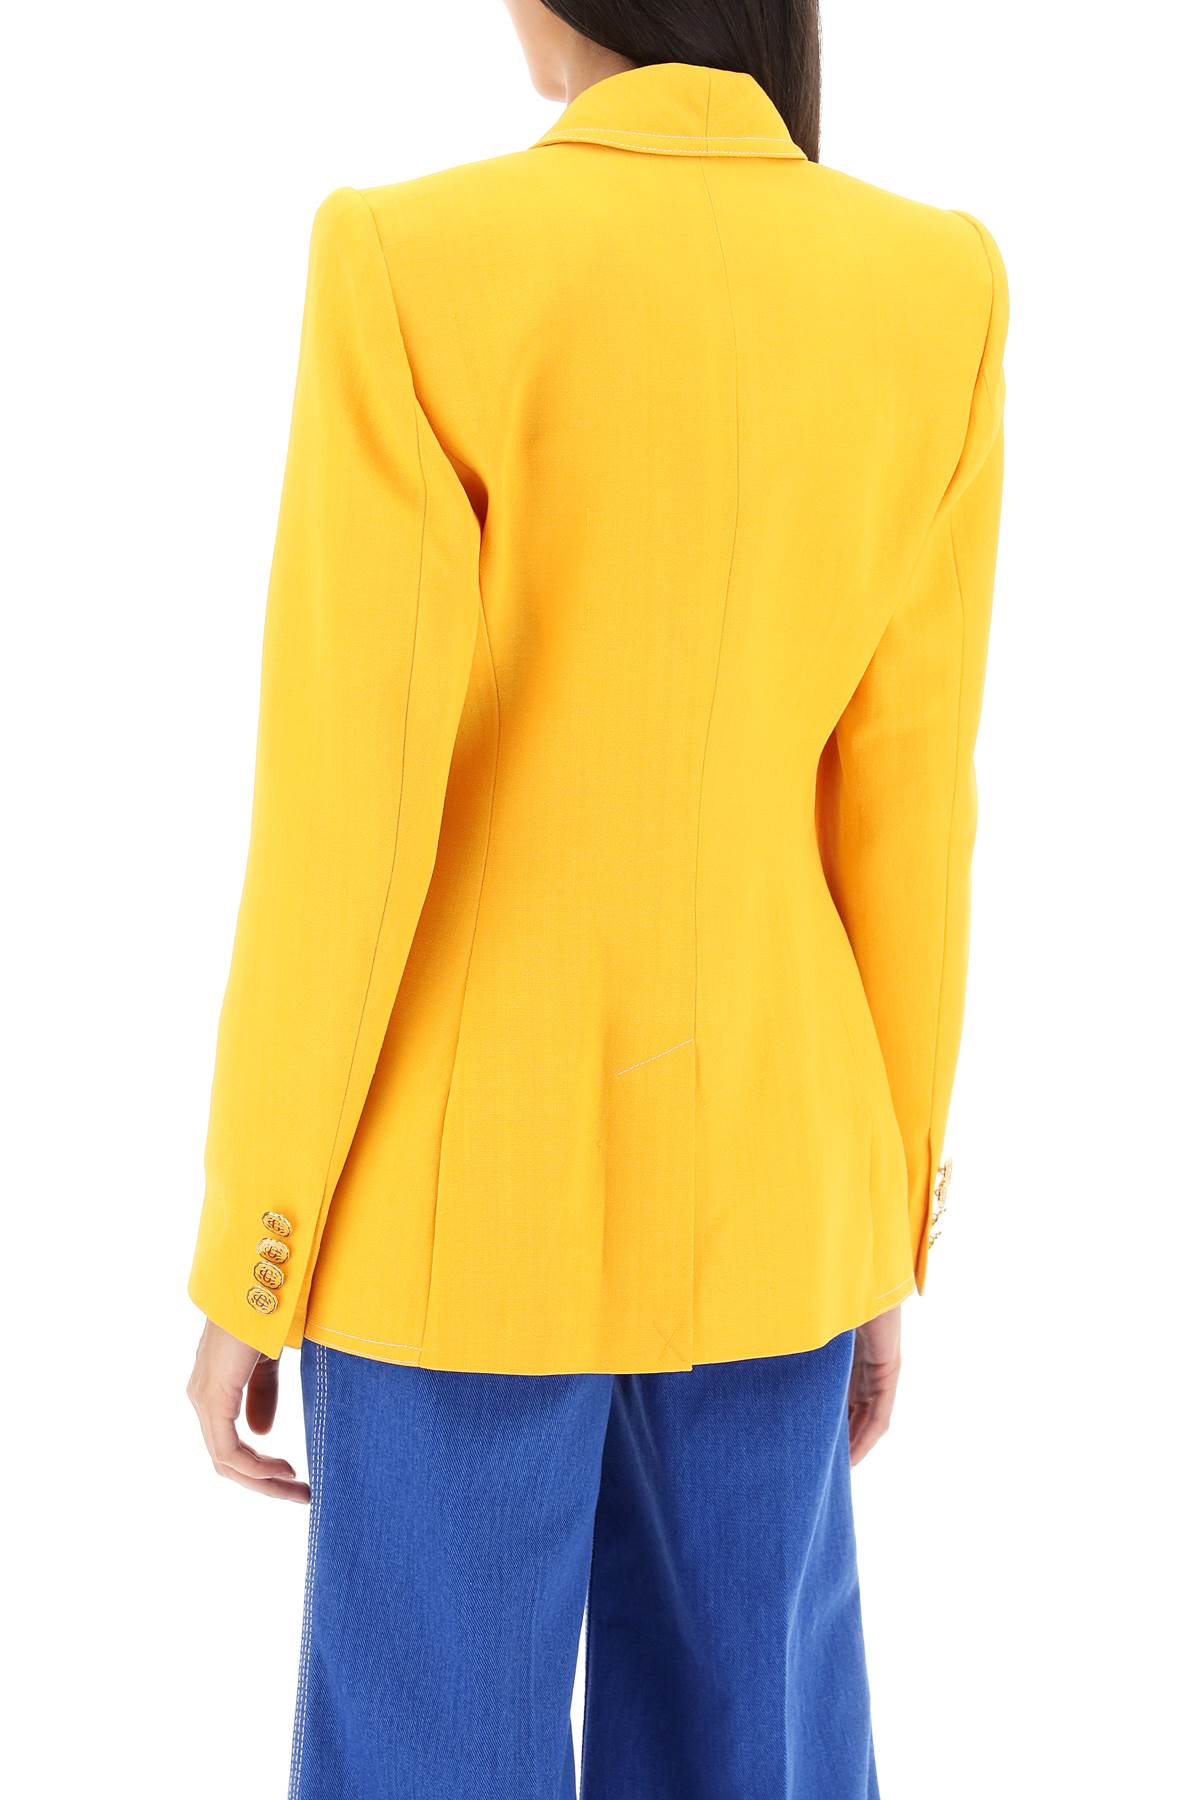 CASABLANCA Yellow Silk-Blend Single-Breasted Blazer for Women - SS24 Collection